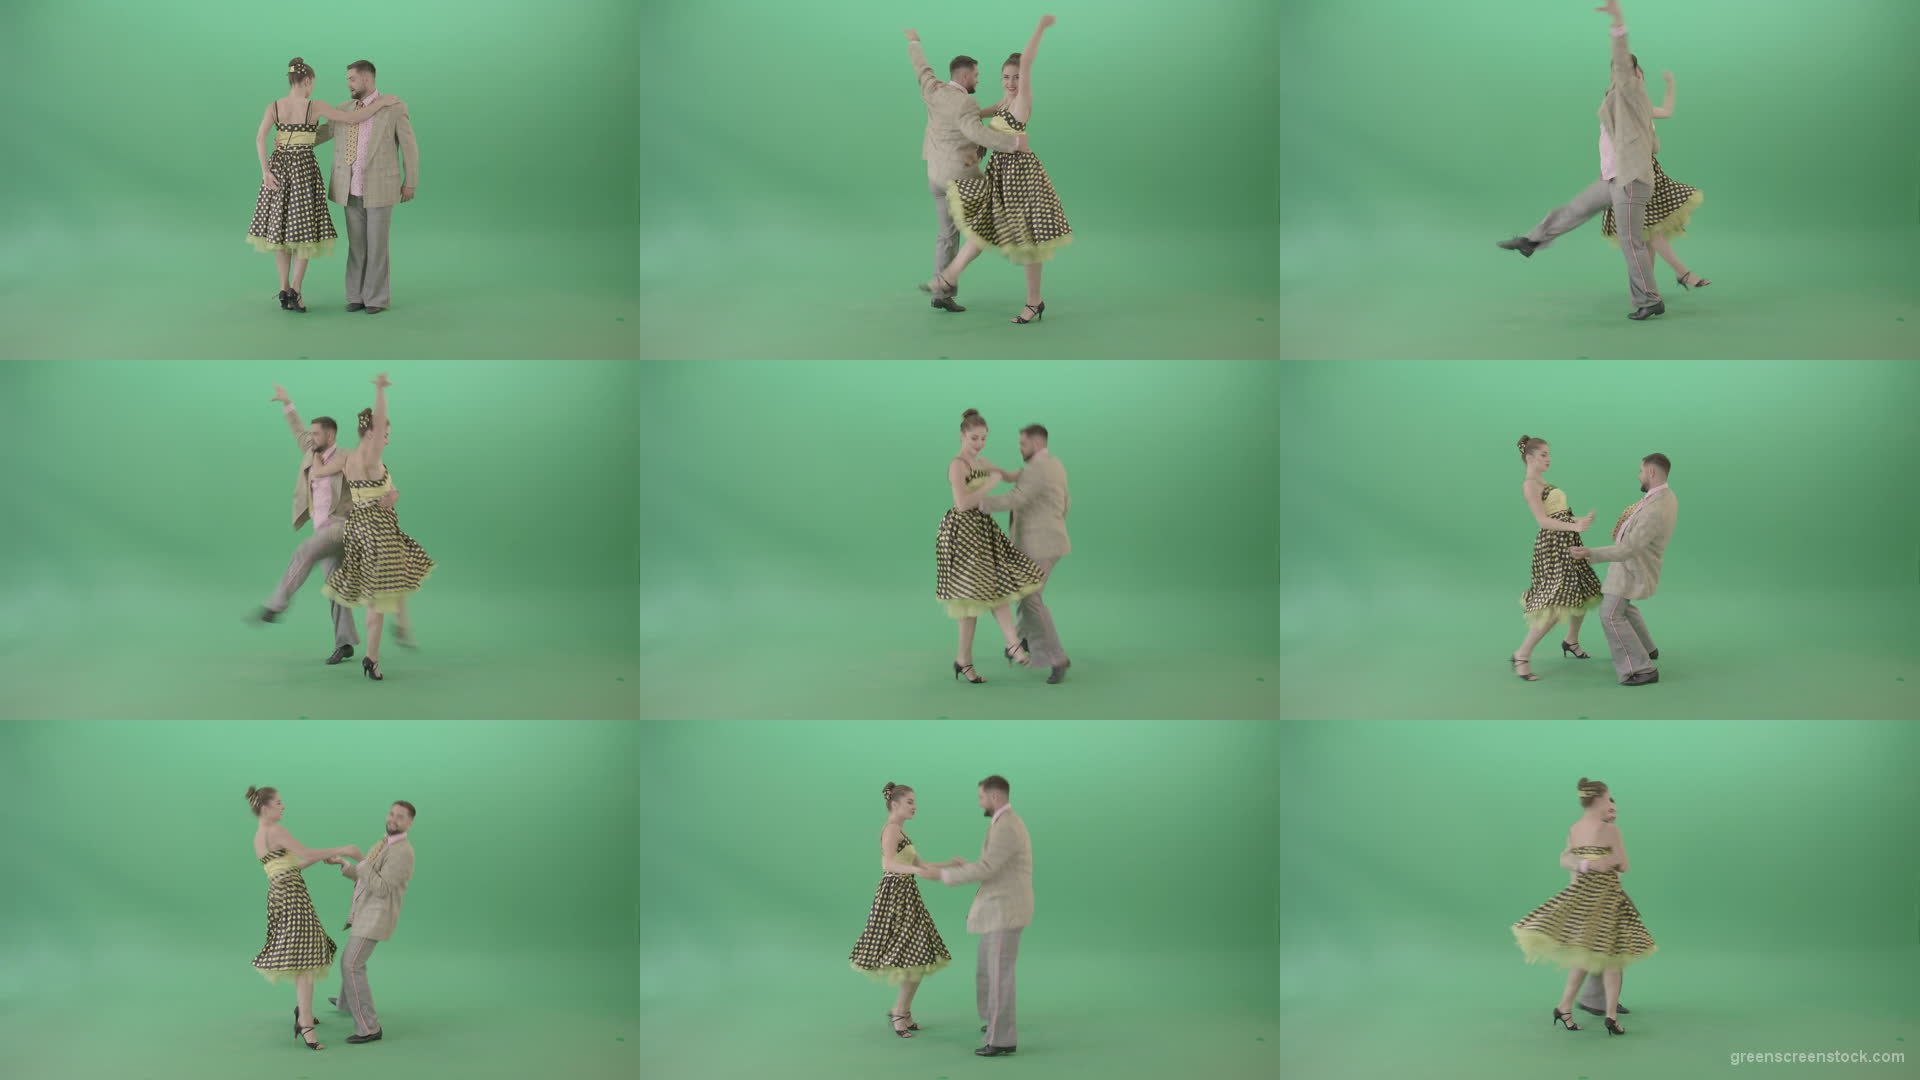 Amazing-couple-dance-Lindy-Hop-and-Rock-and-Roll-isolated-on-Green-Screen-4K-Video-Footage-1920 Green Screen Stock